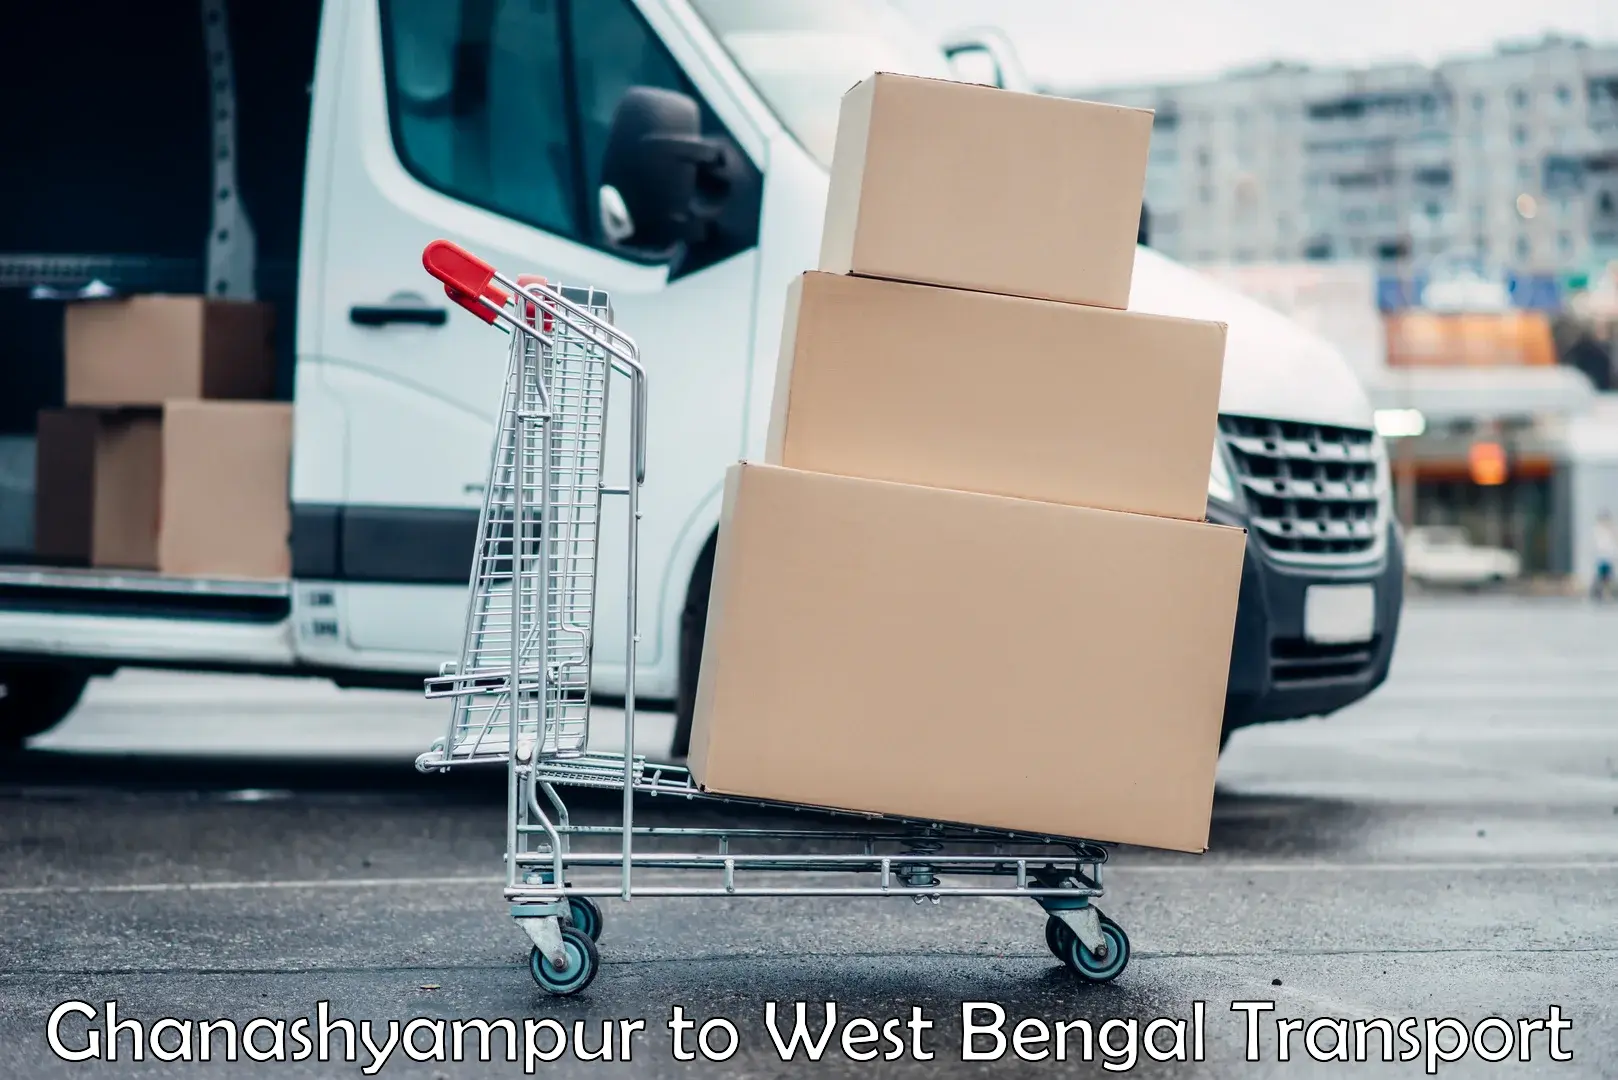 Road transport online services in Ghanashyampur to West Bengal